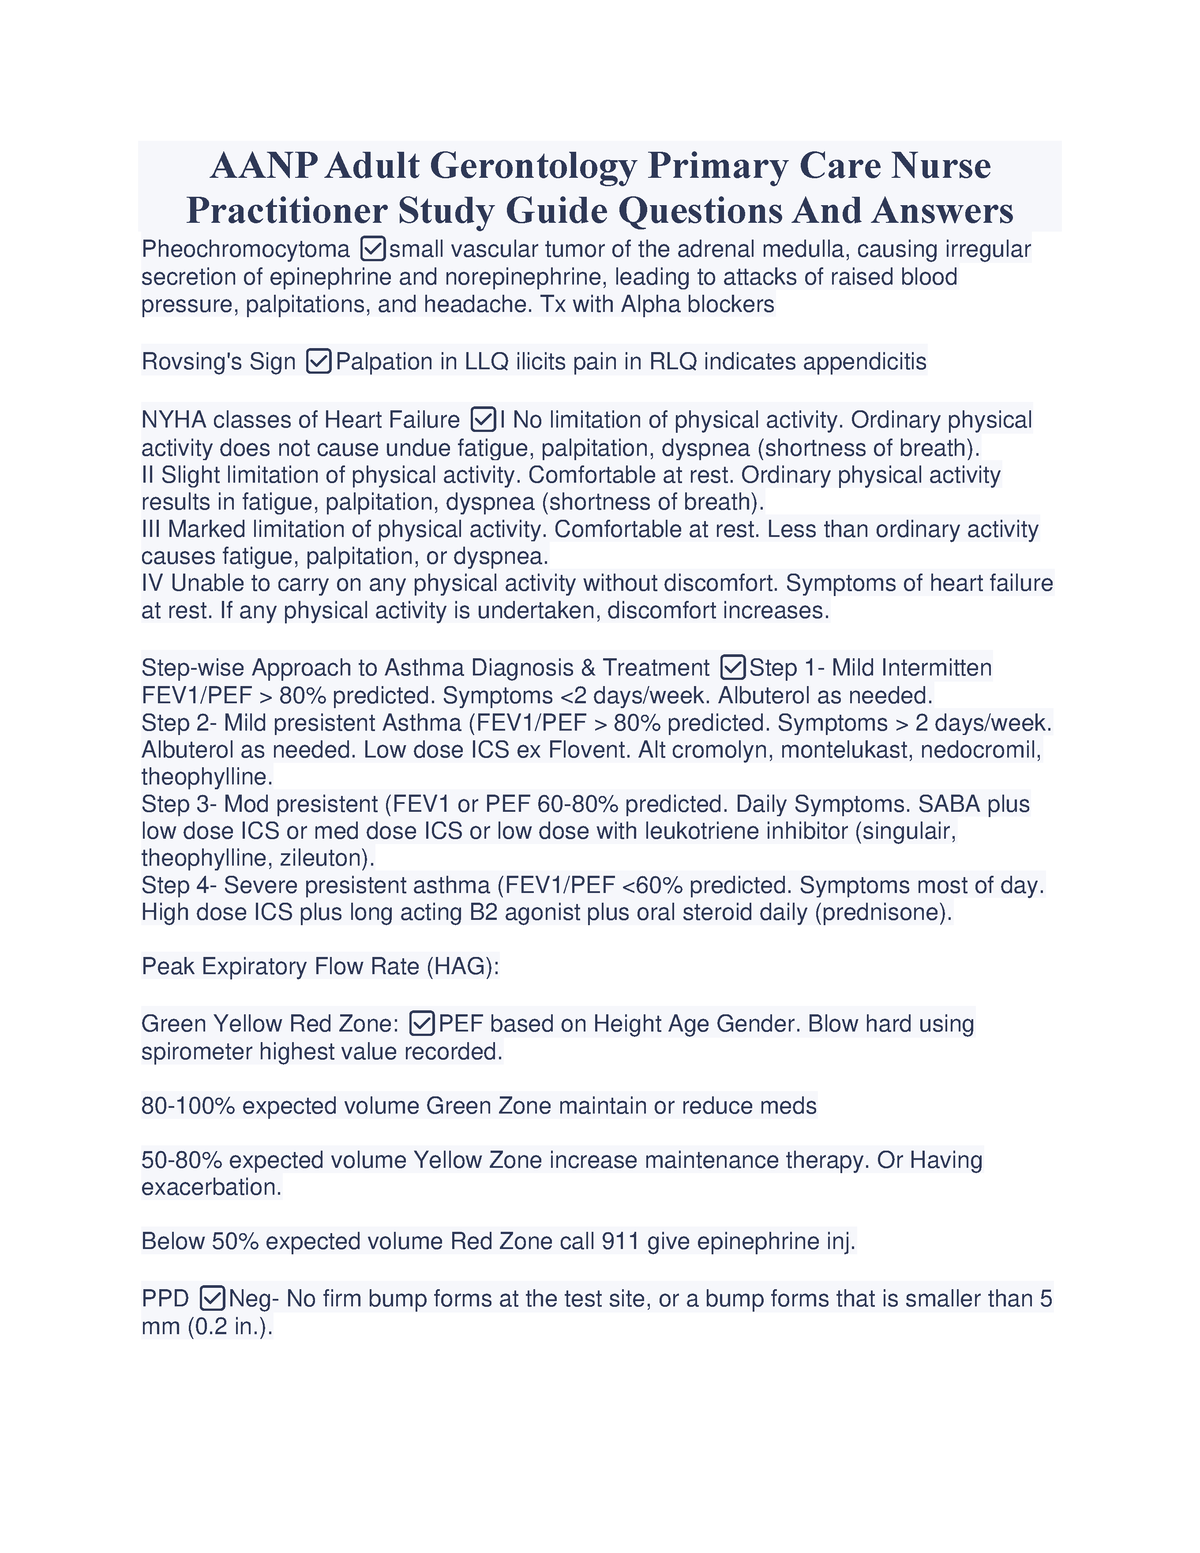 Aanp Adult Gerontology Primary Care Nurse Practitioner Study Guide